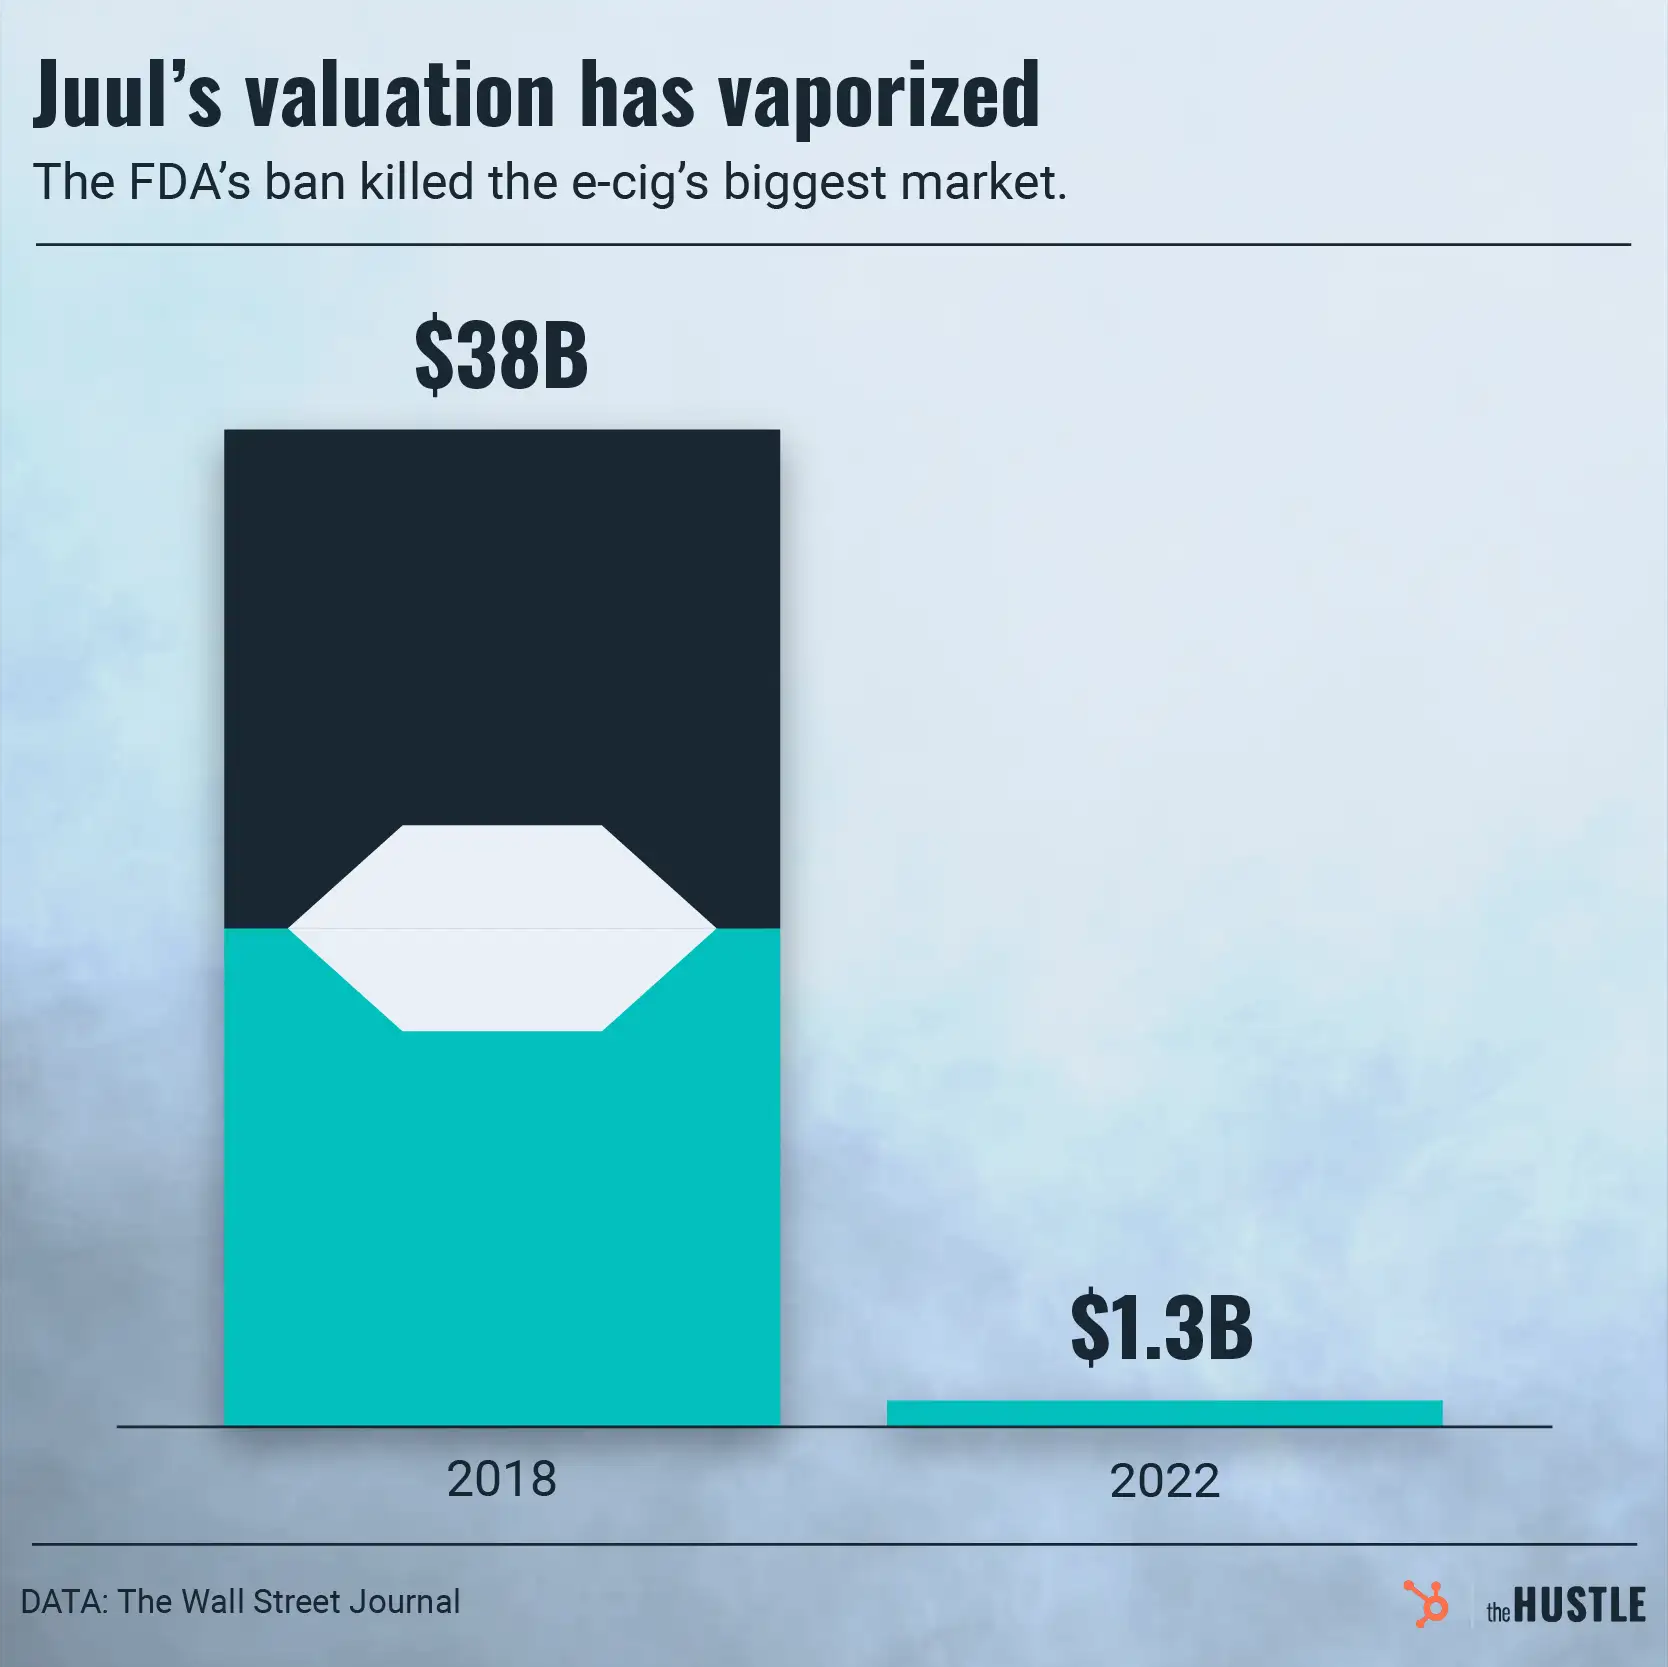 The rise and fall of Juul